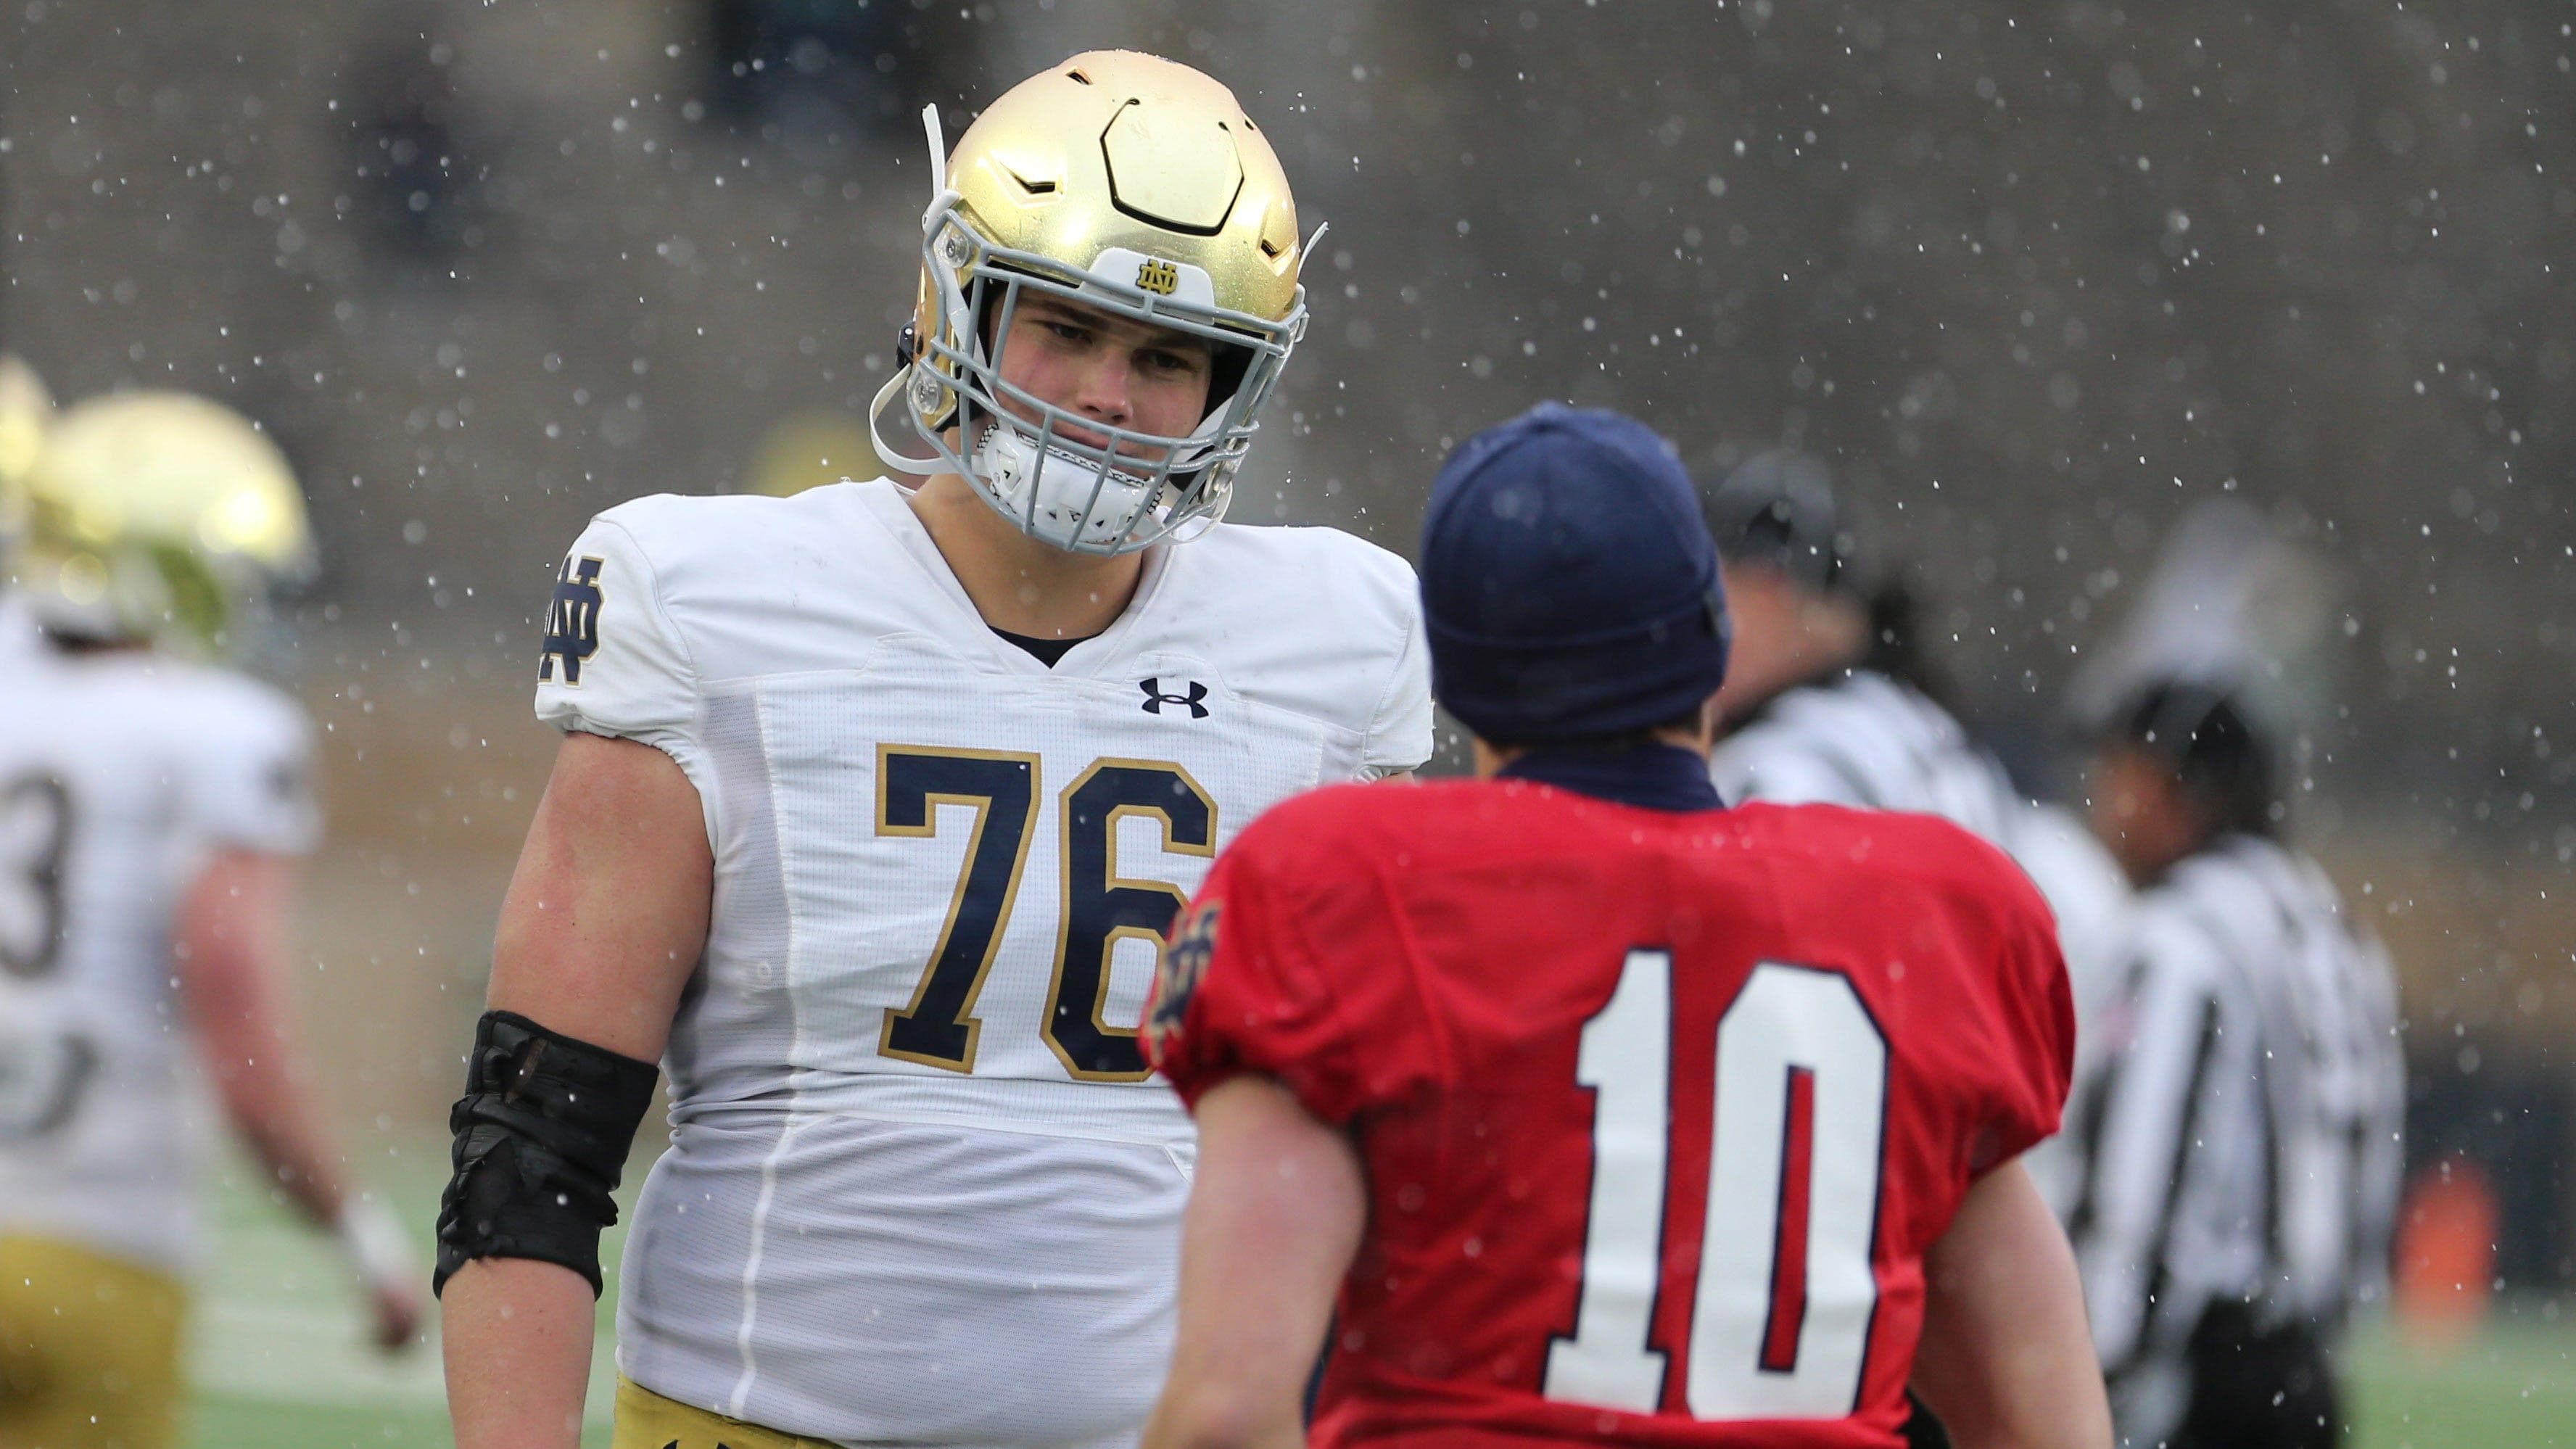 Joe Alt is one massive human being with athleticism and towers over his Notre Dame QB Sam Hartman.